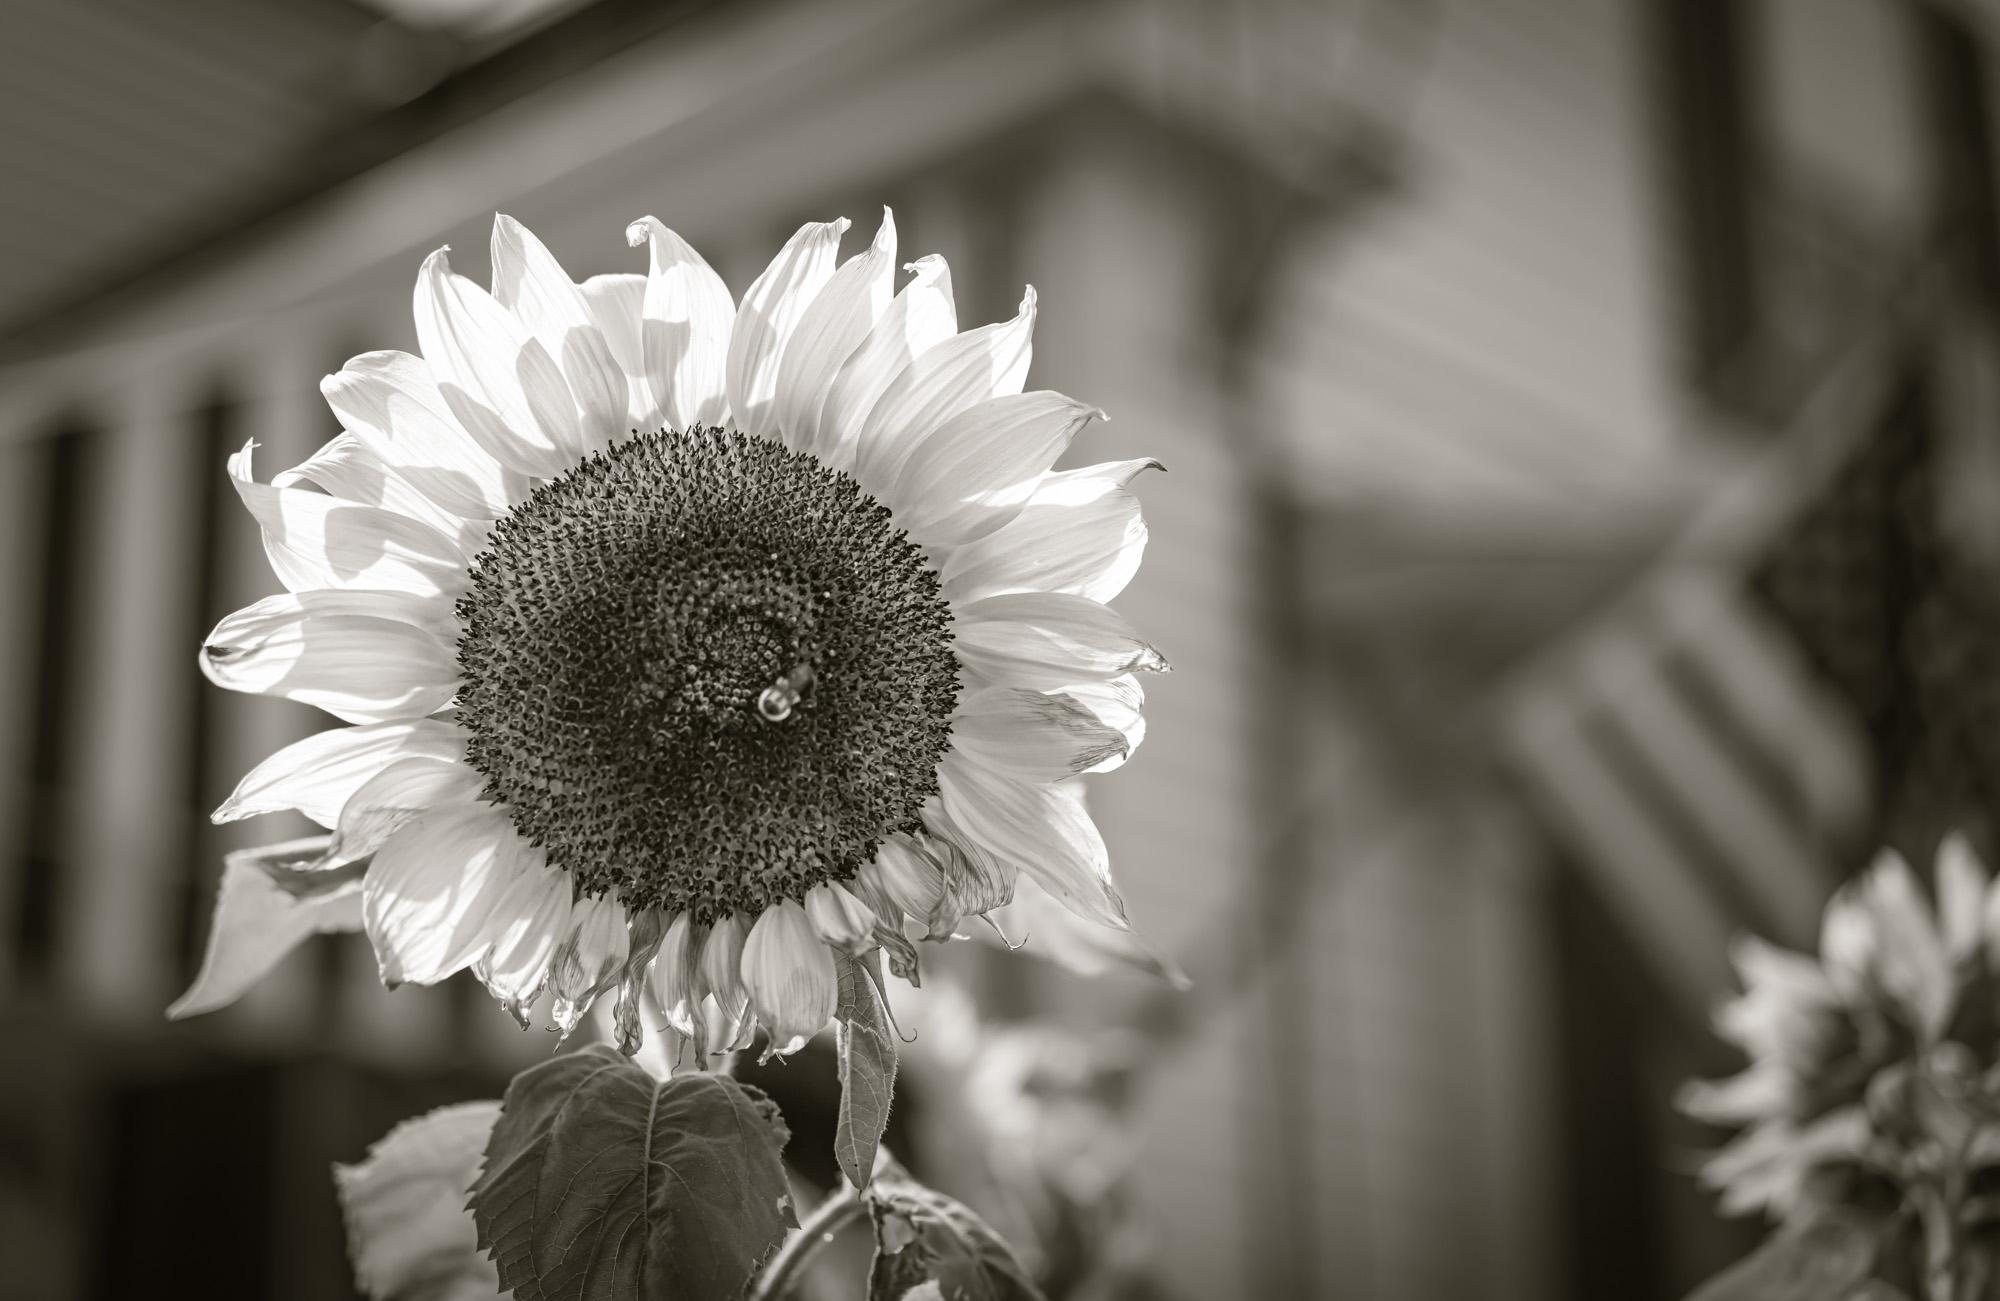   Limited Edition Black and White Photograph - Botanical, " Bright Day", 2020. Taken on one of the most sun drenched, all is well days, where the garden landscapes are well cared for in Provincetown, MA on Cape Cod. The honeybee front and center is